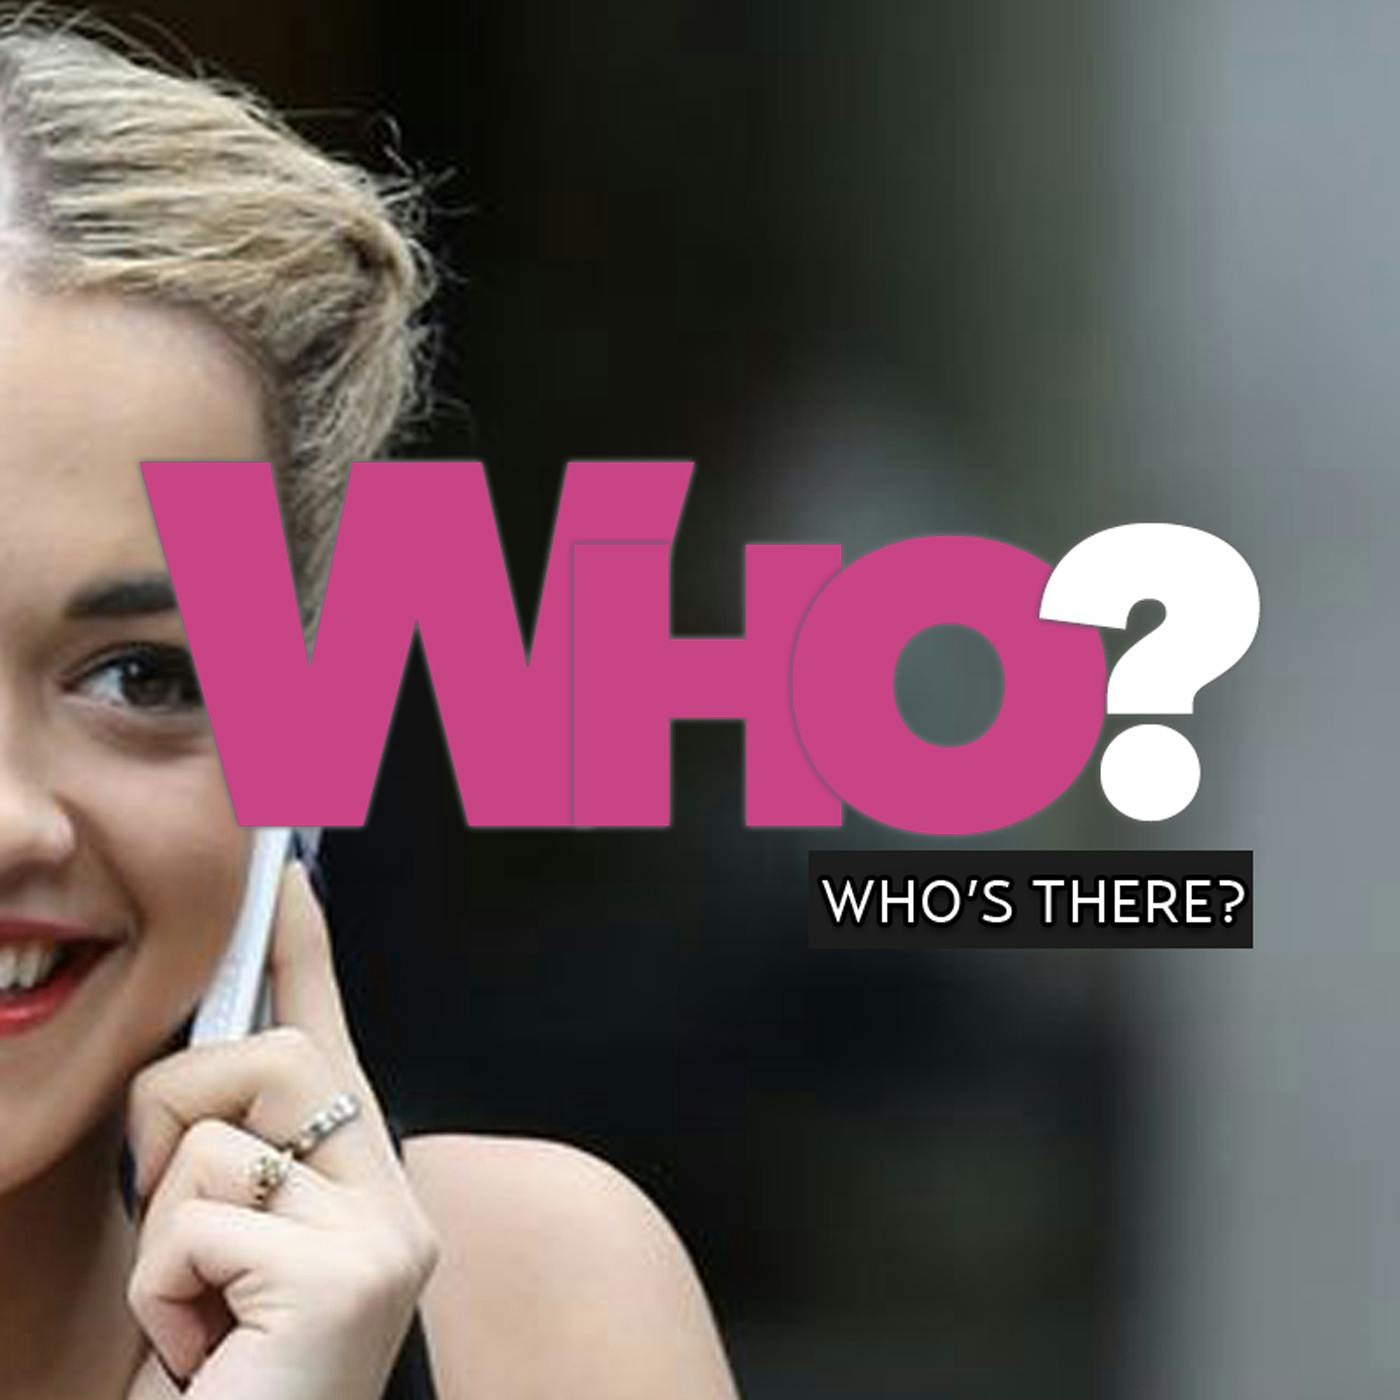 Who's There: Sarah Harding & The Sugar Factory?